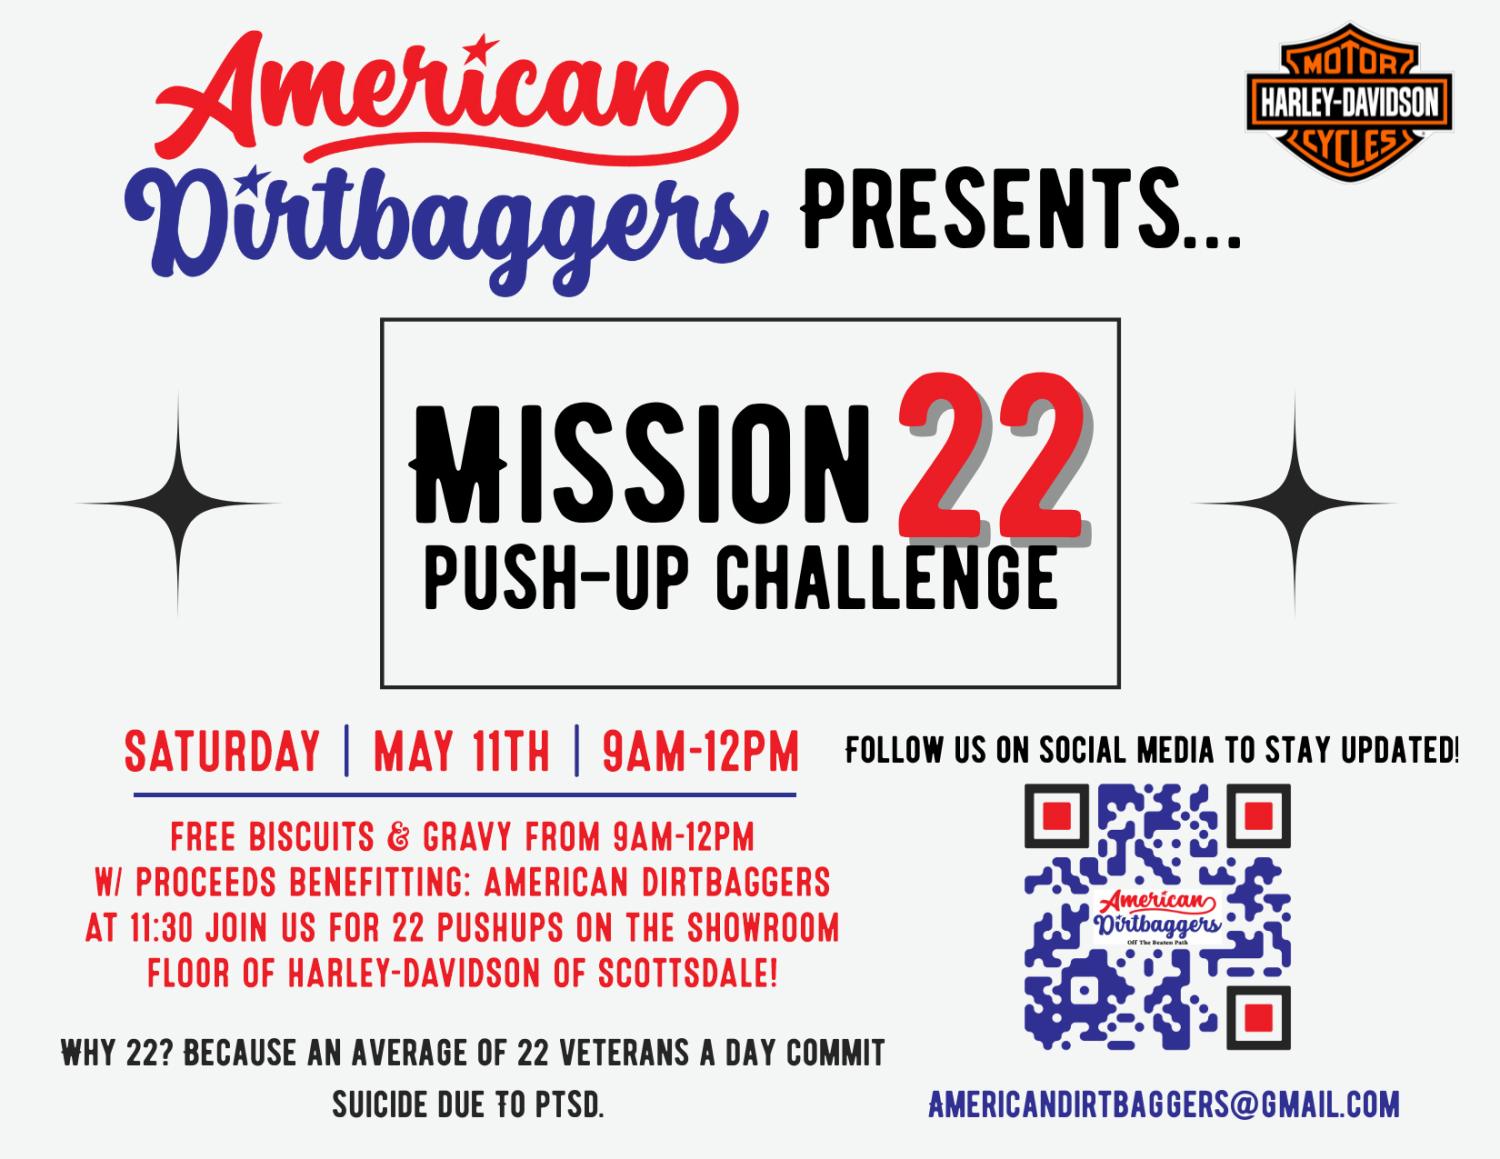 Mission 22 - American Dirtbaggers